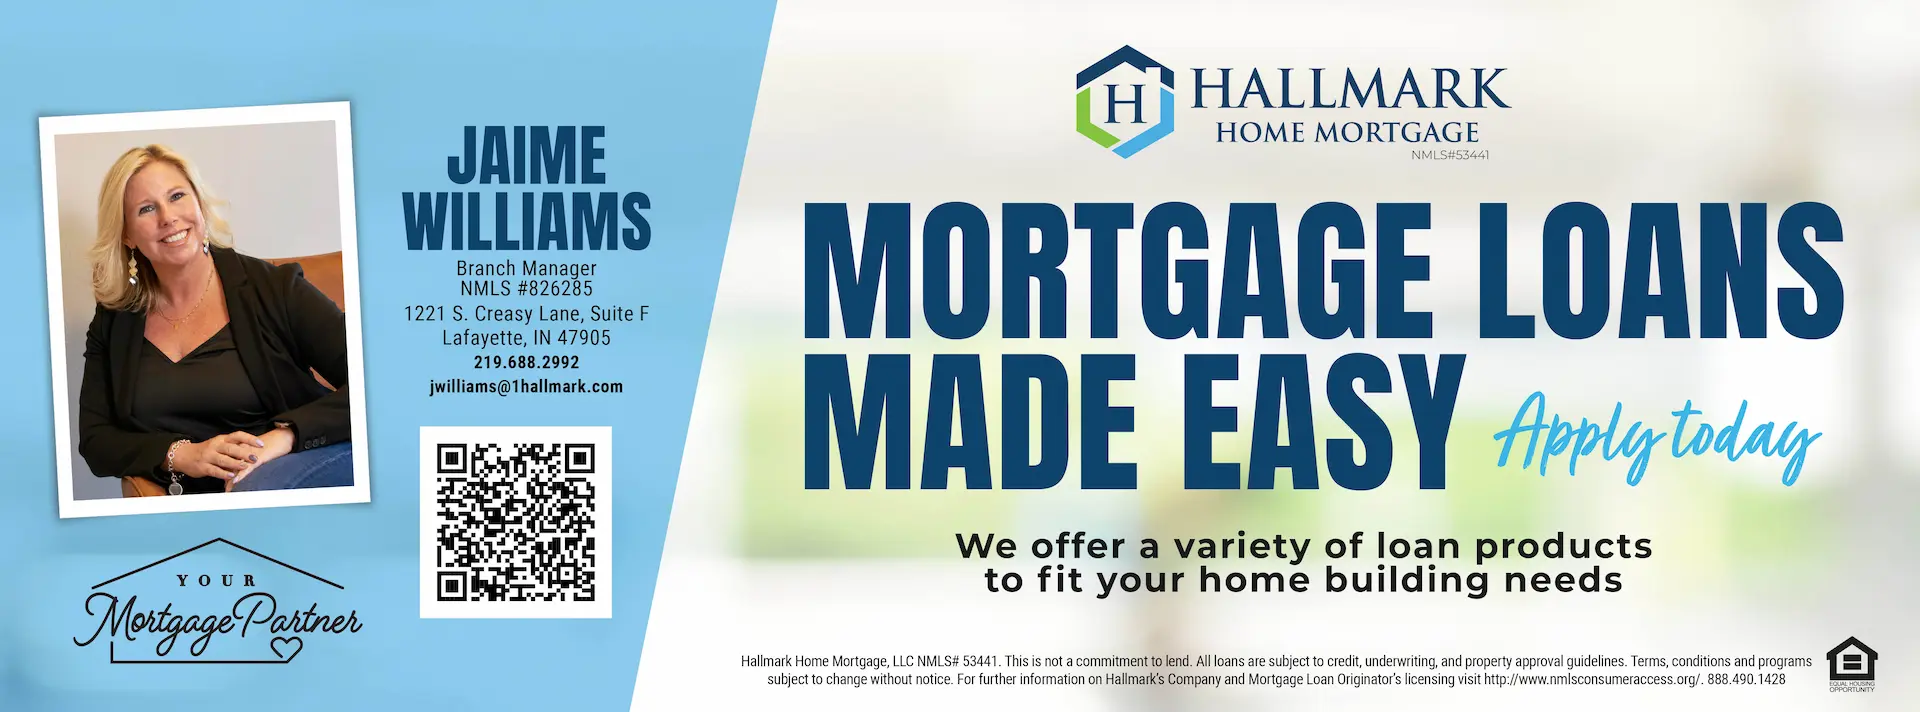 Mortgages by Mennen - Hallmark Home Mortgages